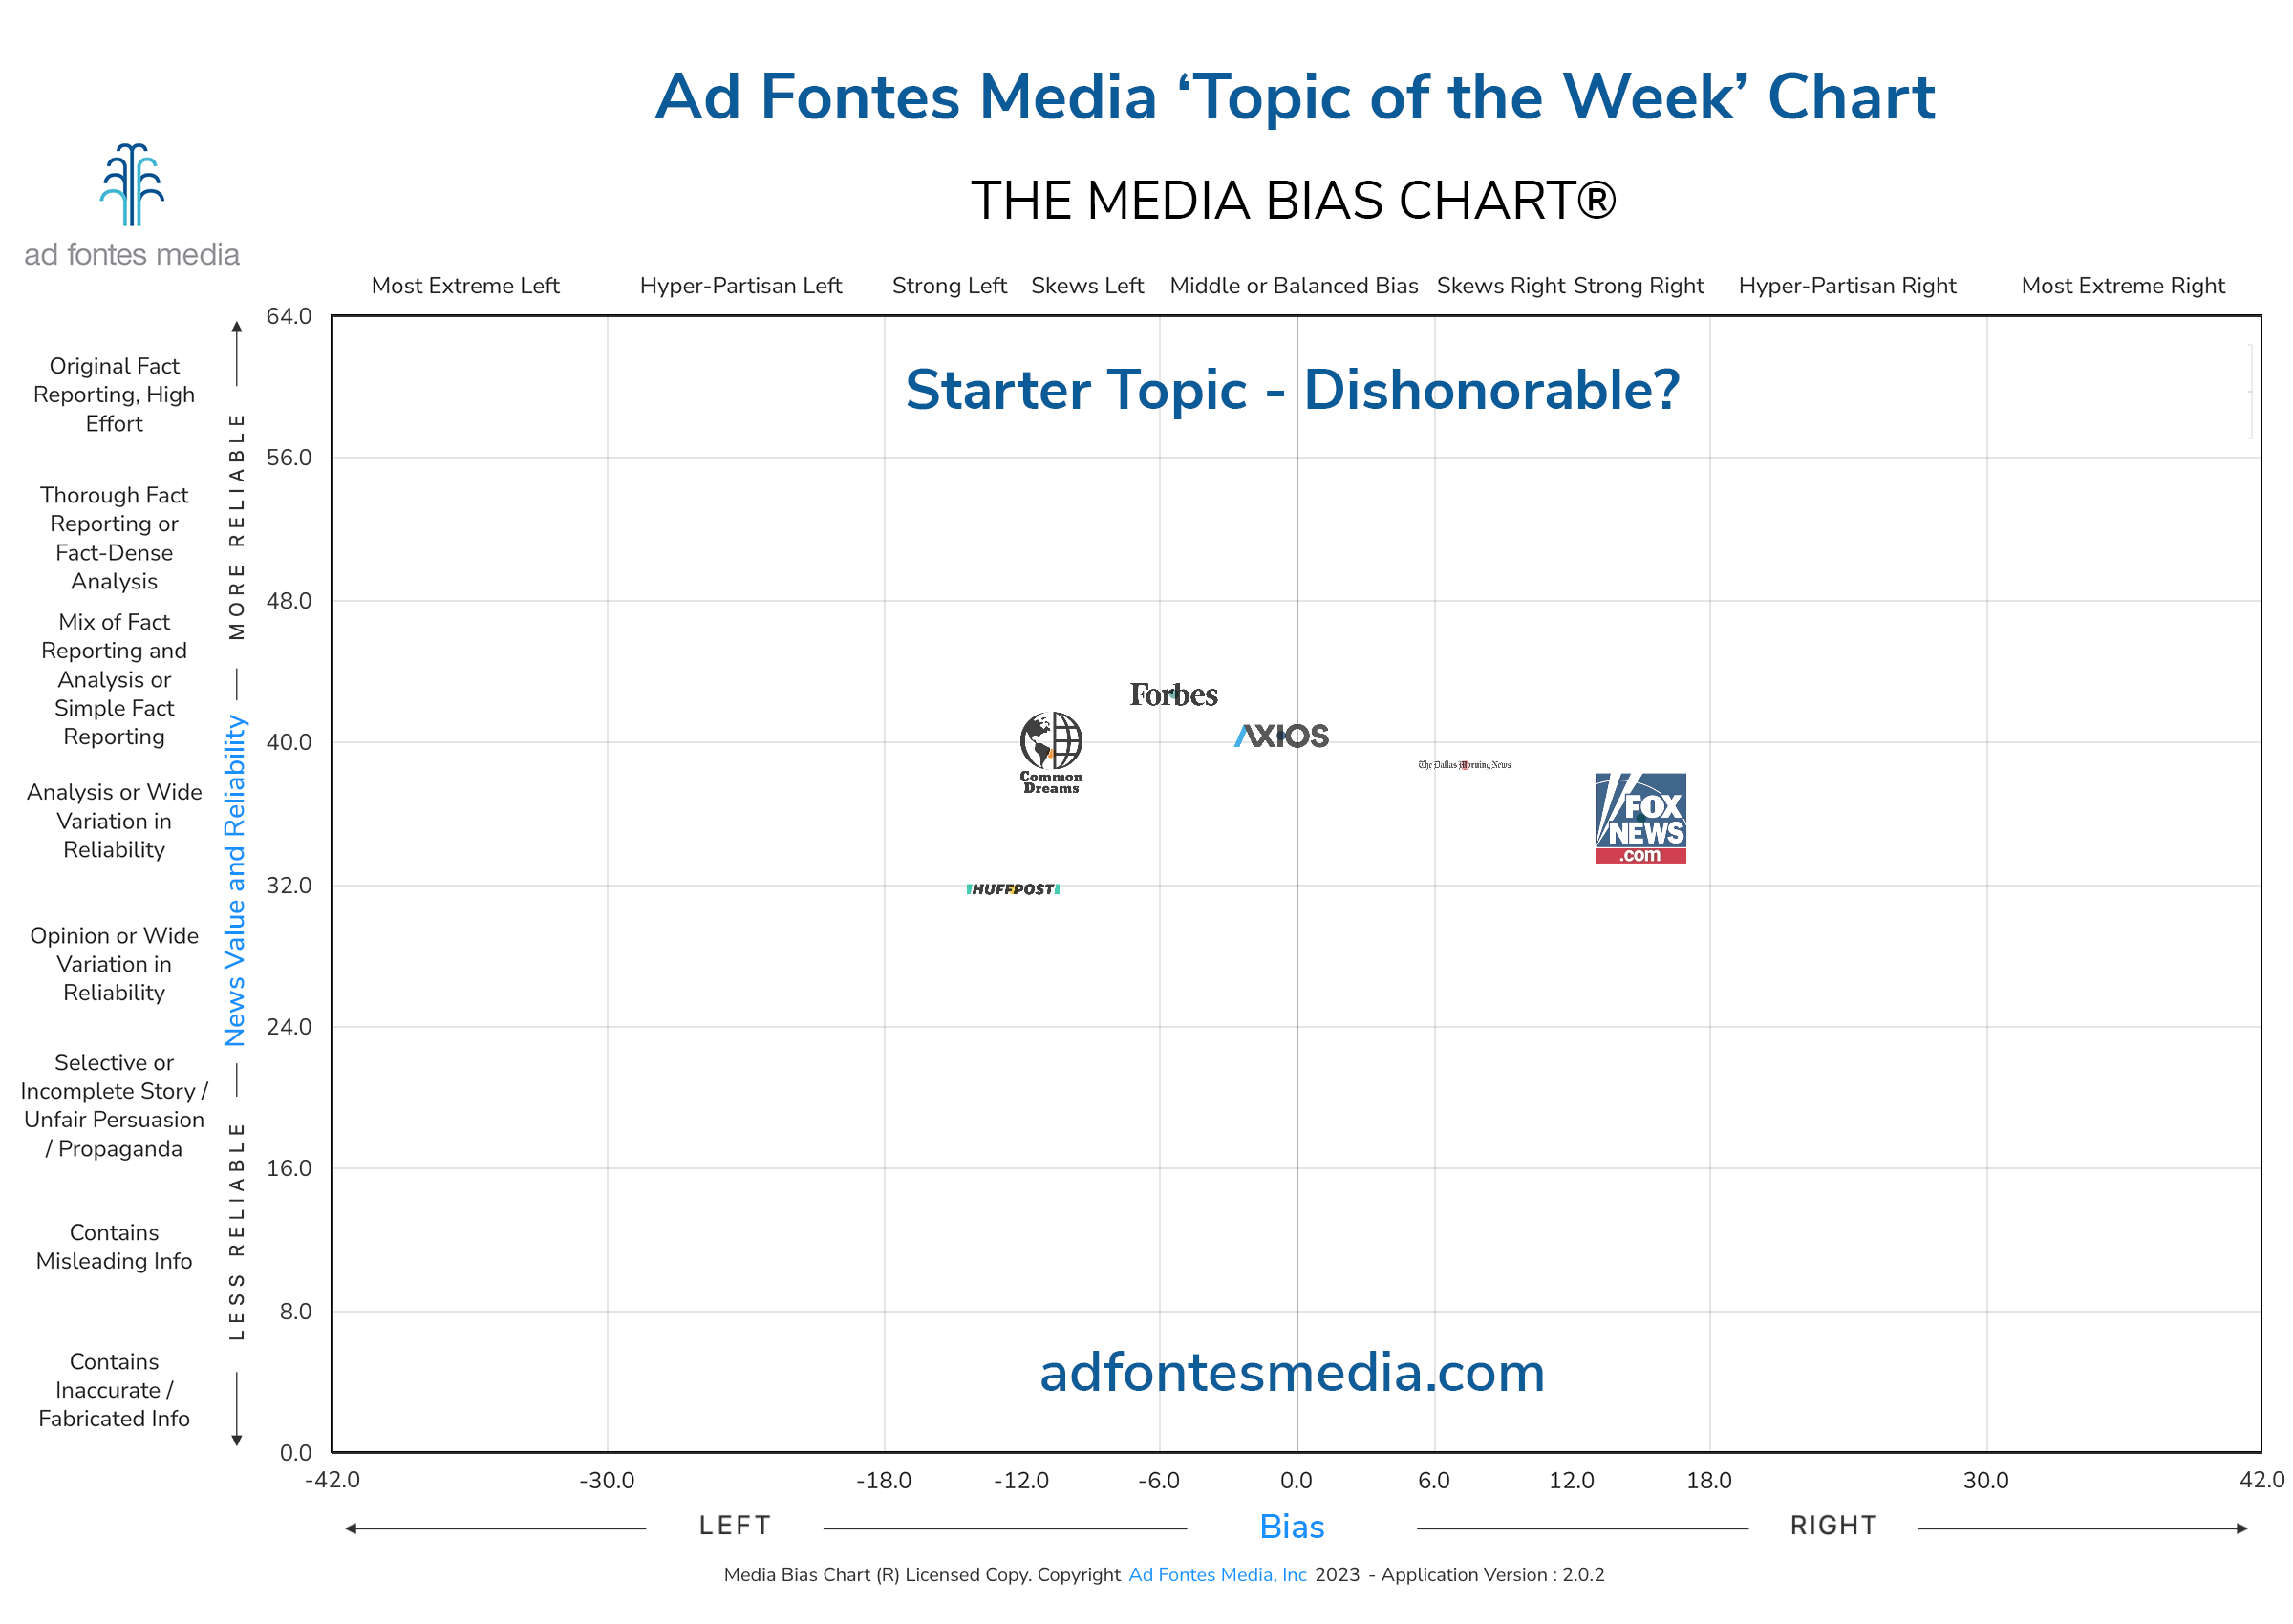 Scores of the Dishonorable? articles on the chart